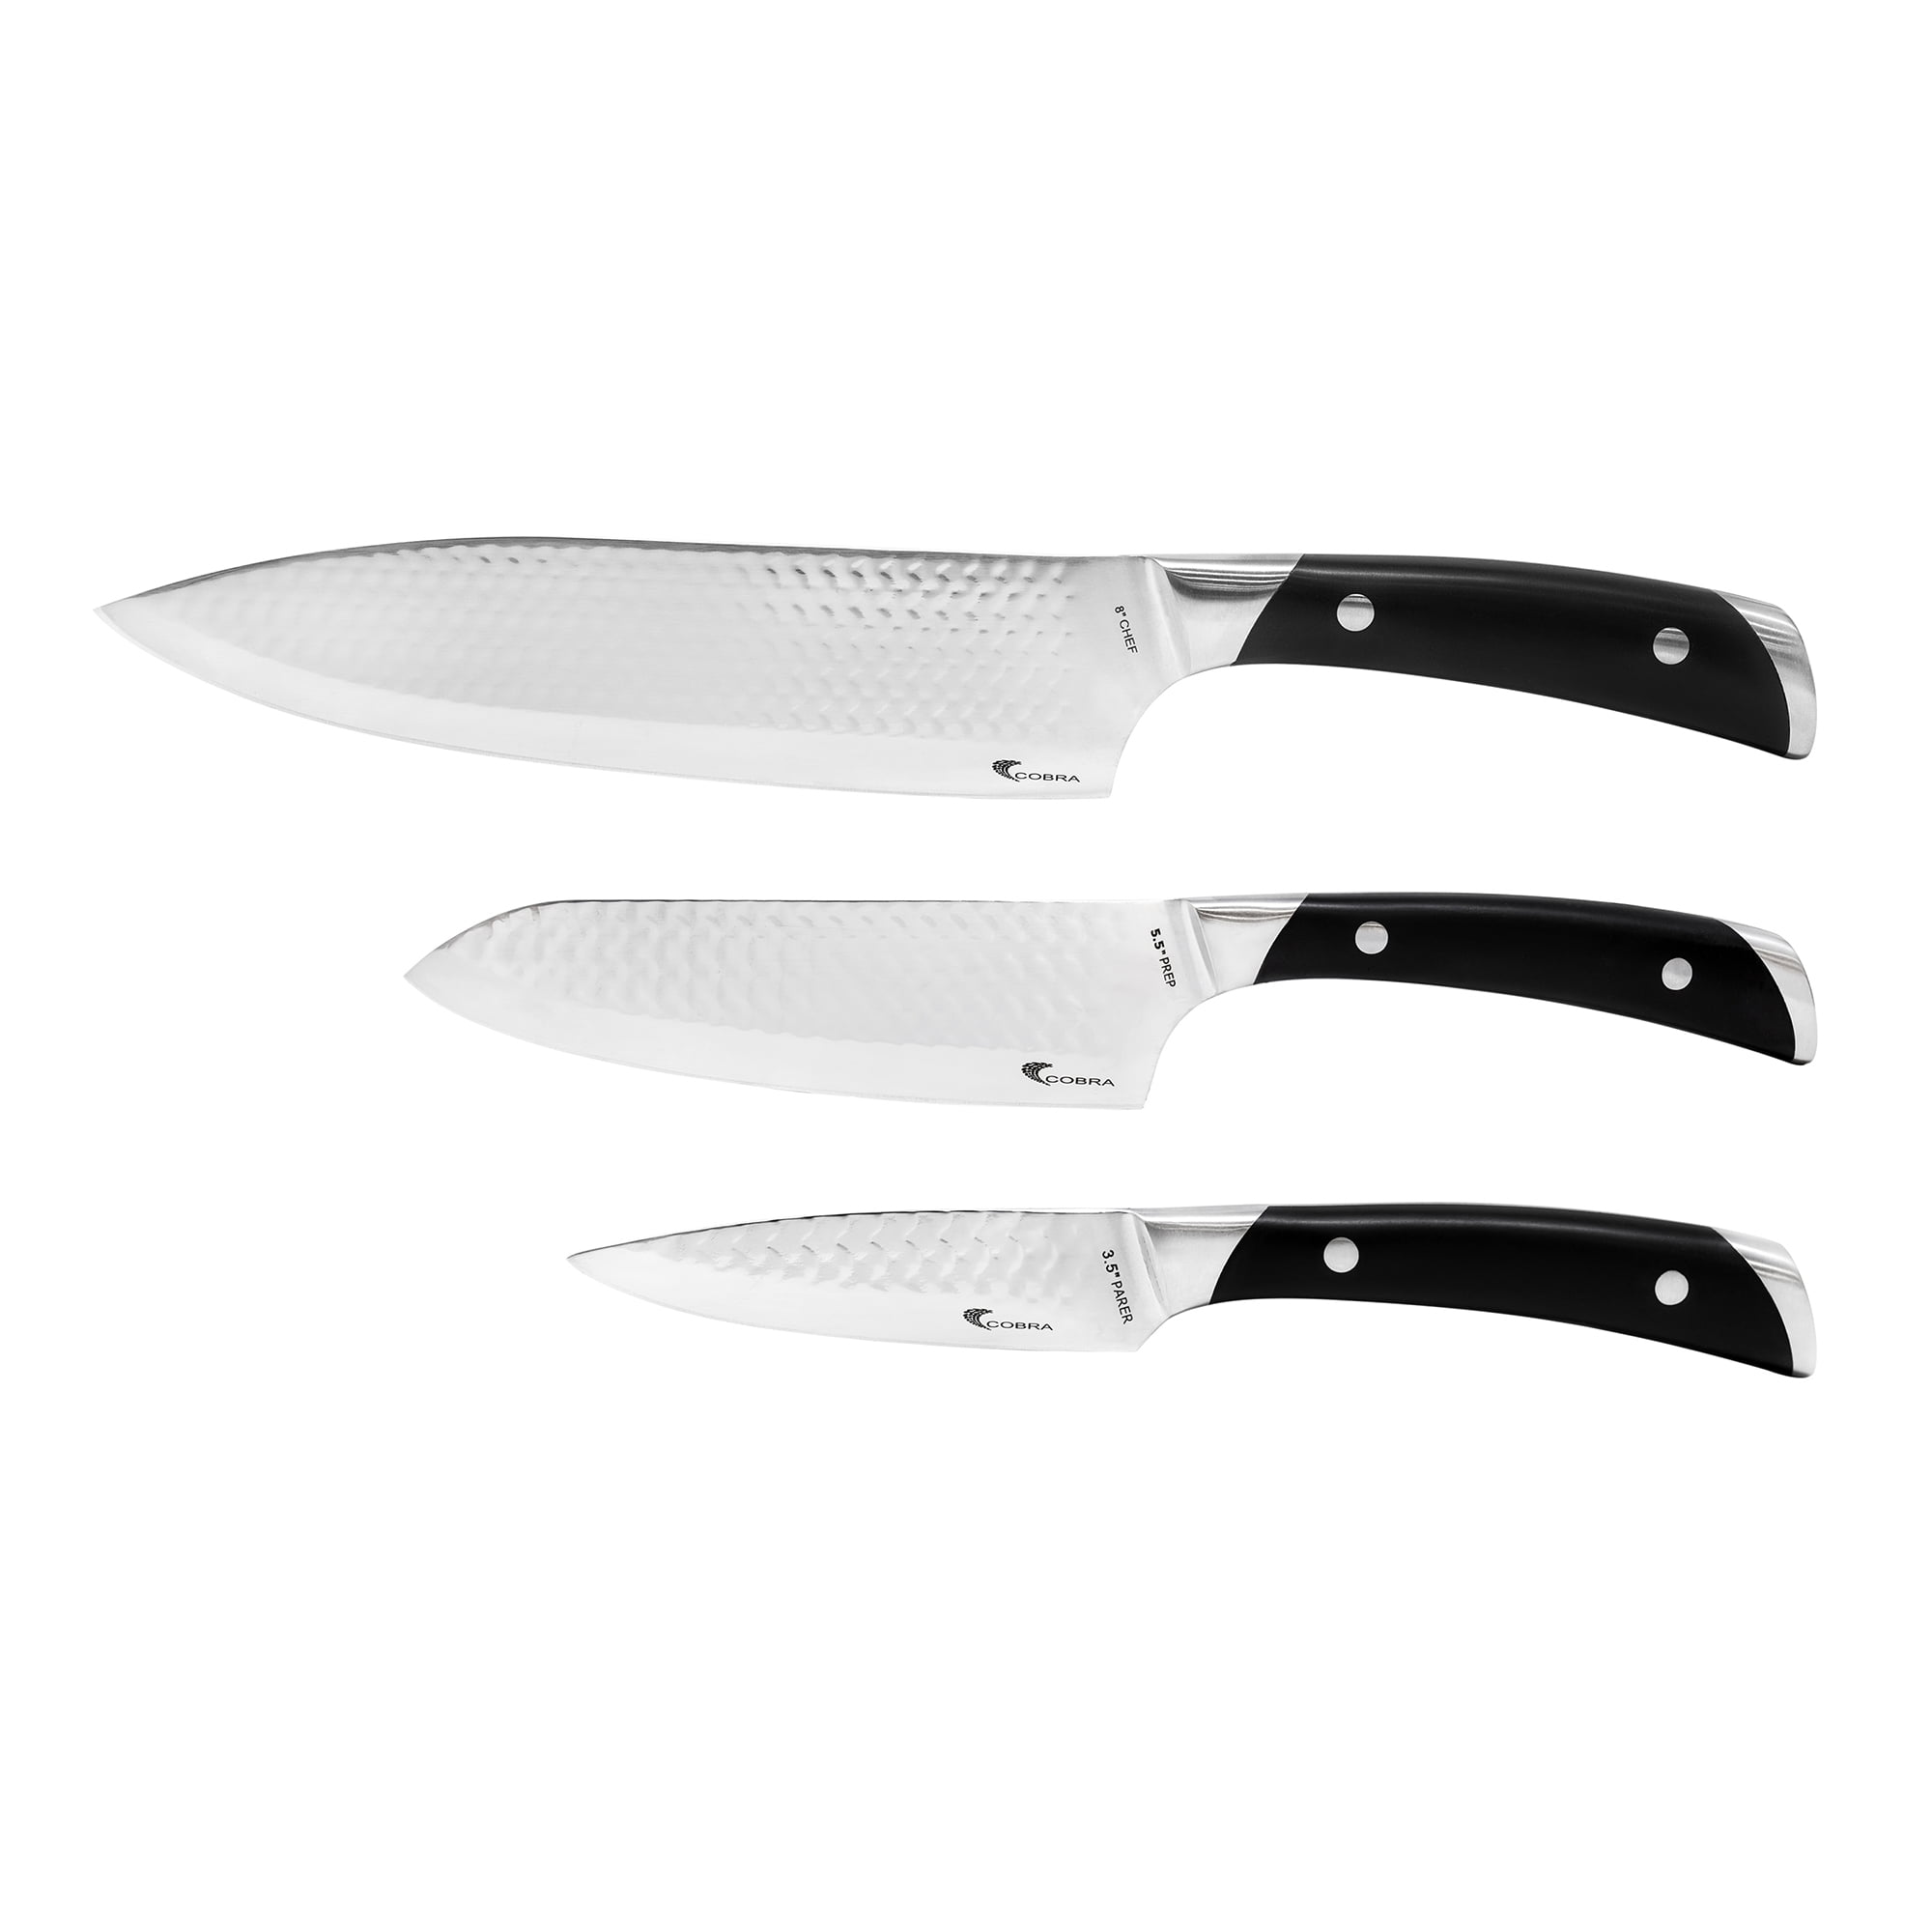 Kalorik - Our chef inspired knifes will be on CBS Deals! Make sure